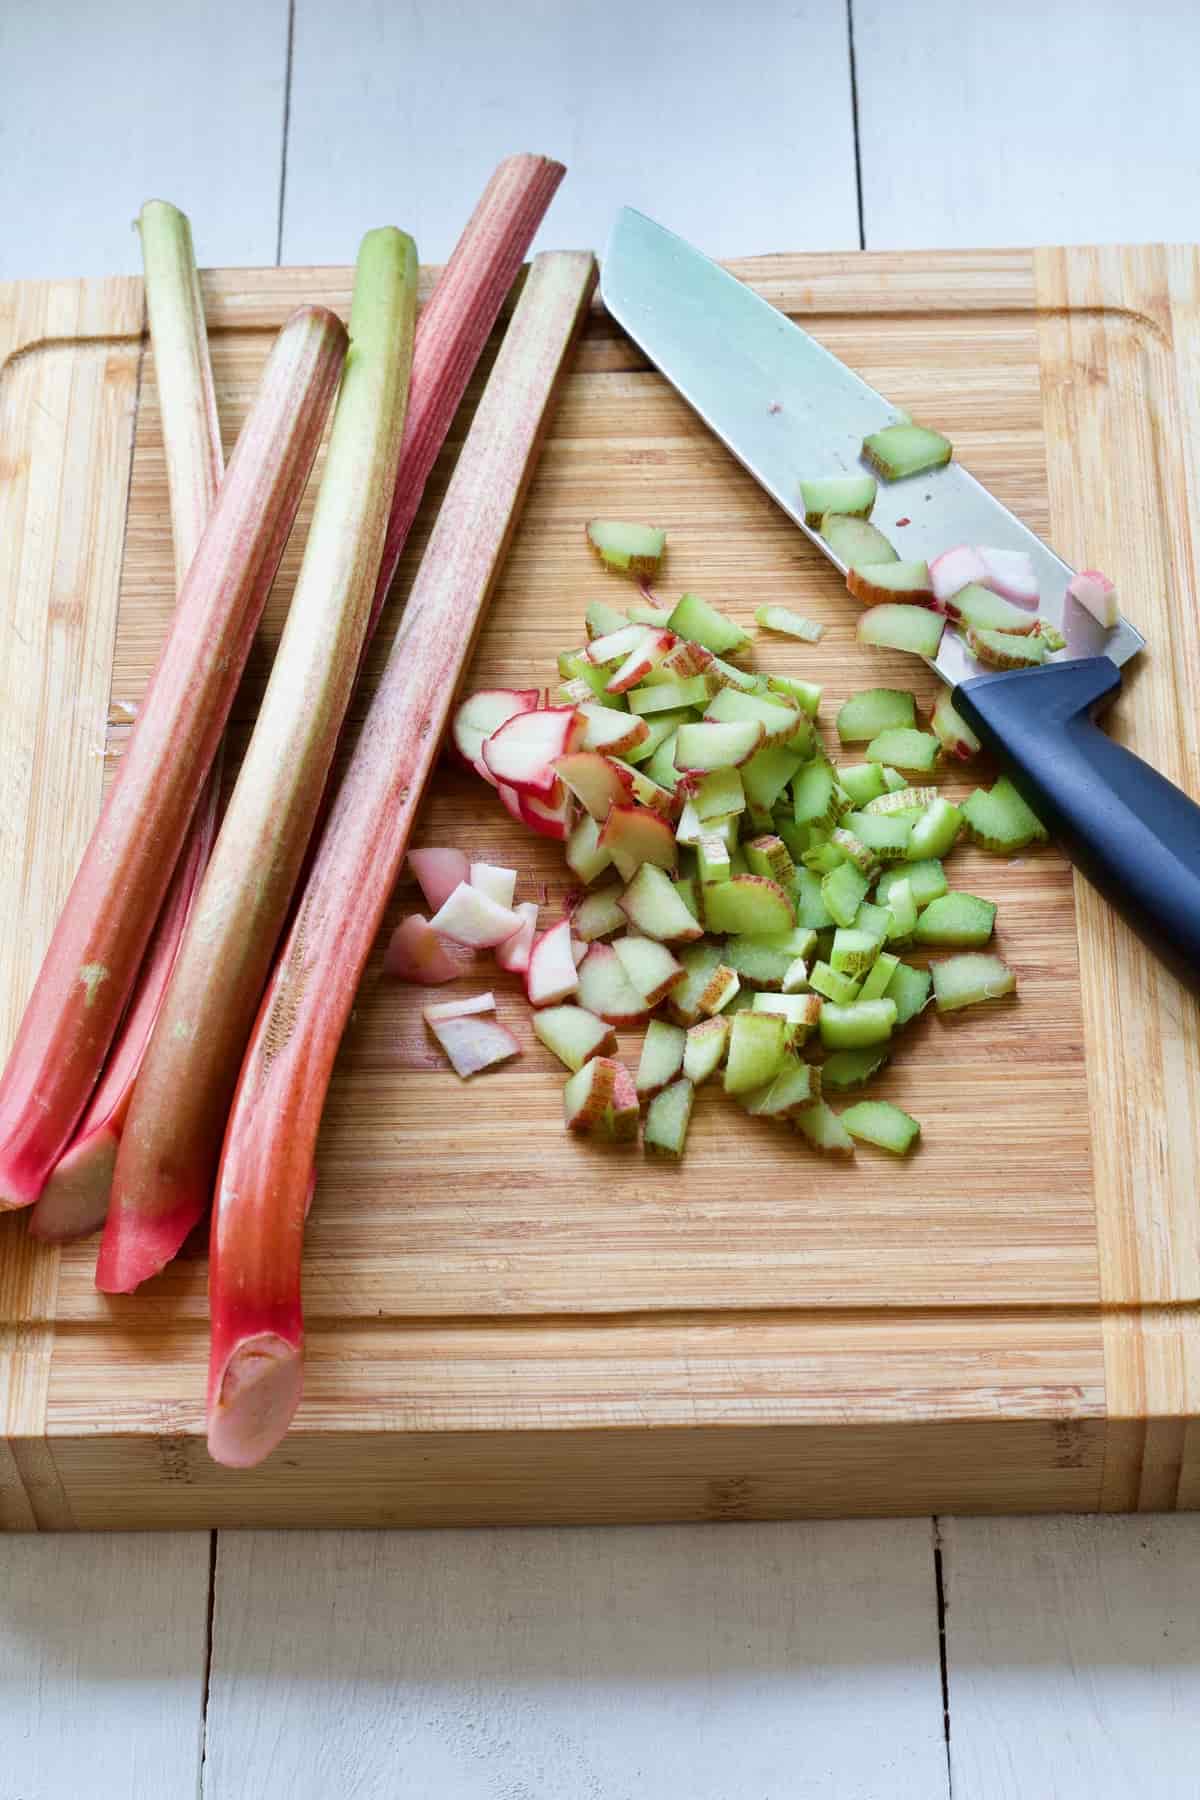 Partially chopped rhubarb on the cutting board.